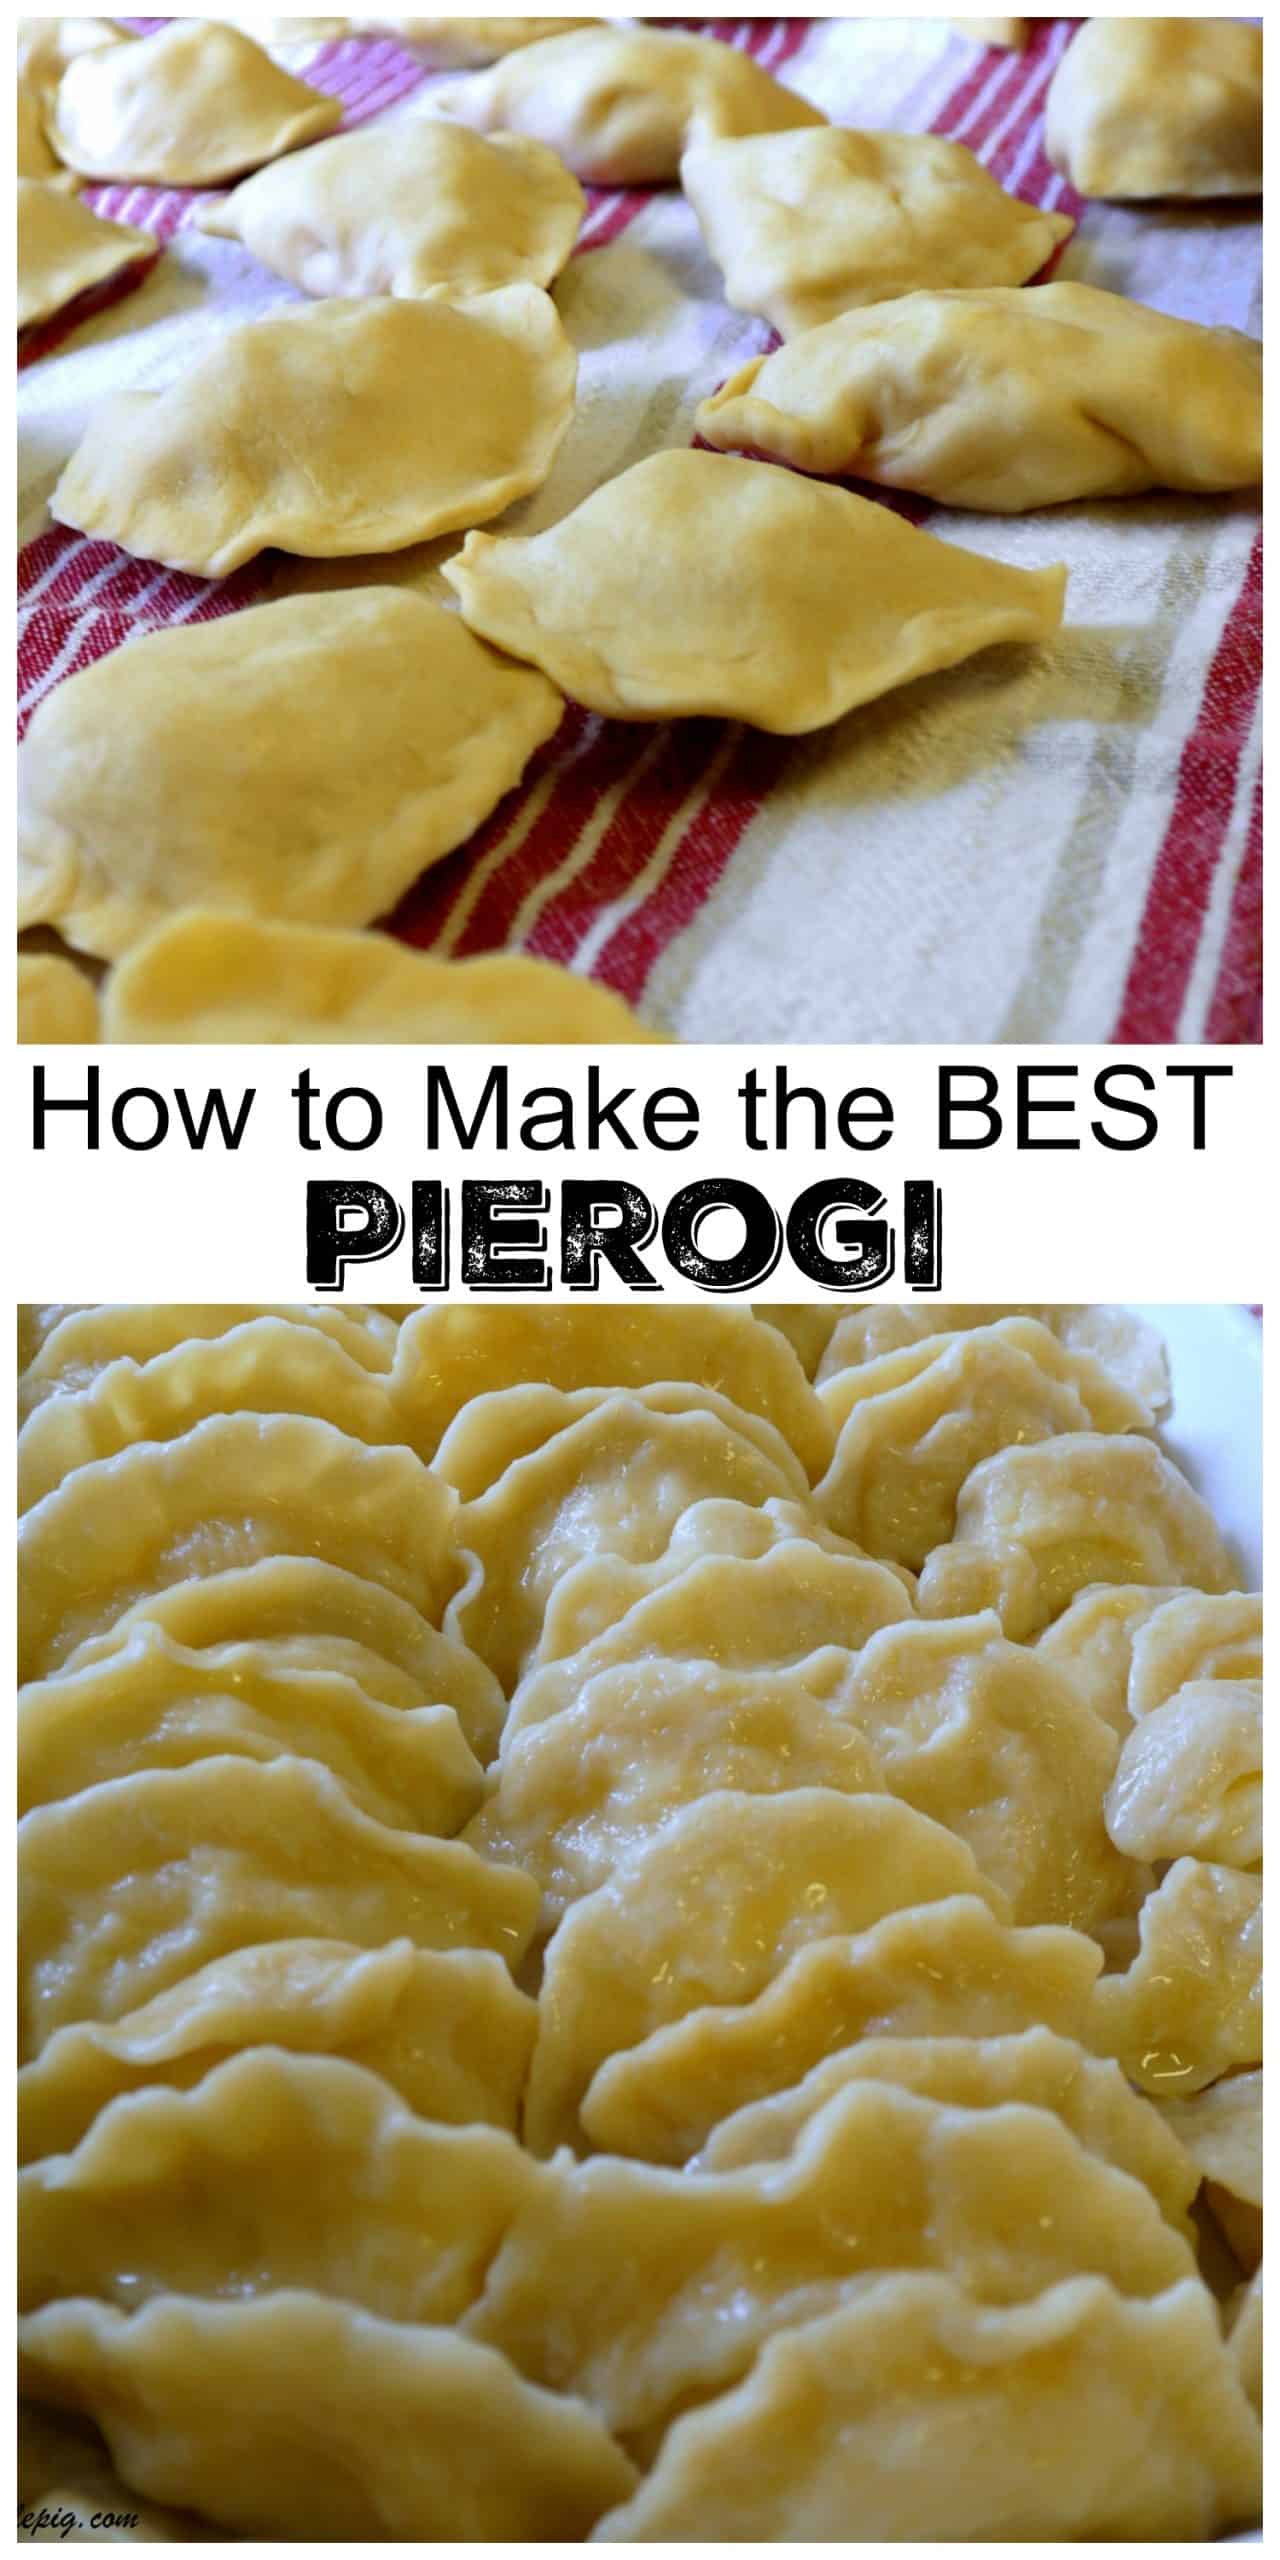 Crafting the ultimate Polish comfort food, homemade pierogi, is definitely a labor of love . From perfecting the dough to nailing the cheesy potatoes and farmer's cheese filling, get ready to enjoy the authentic recipe that's been a staple in my Polish family for years. via @cmpollak1